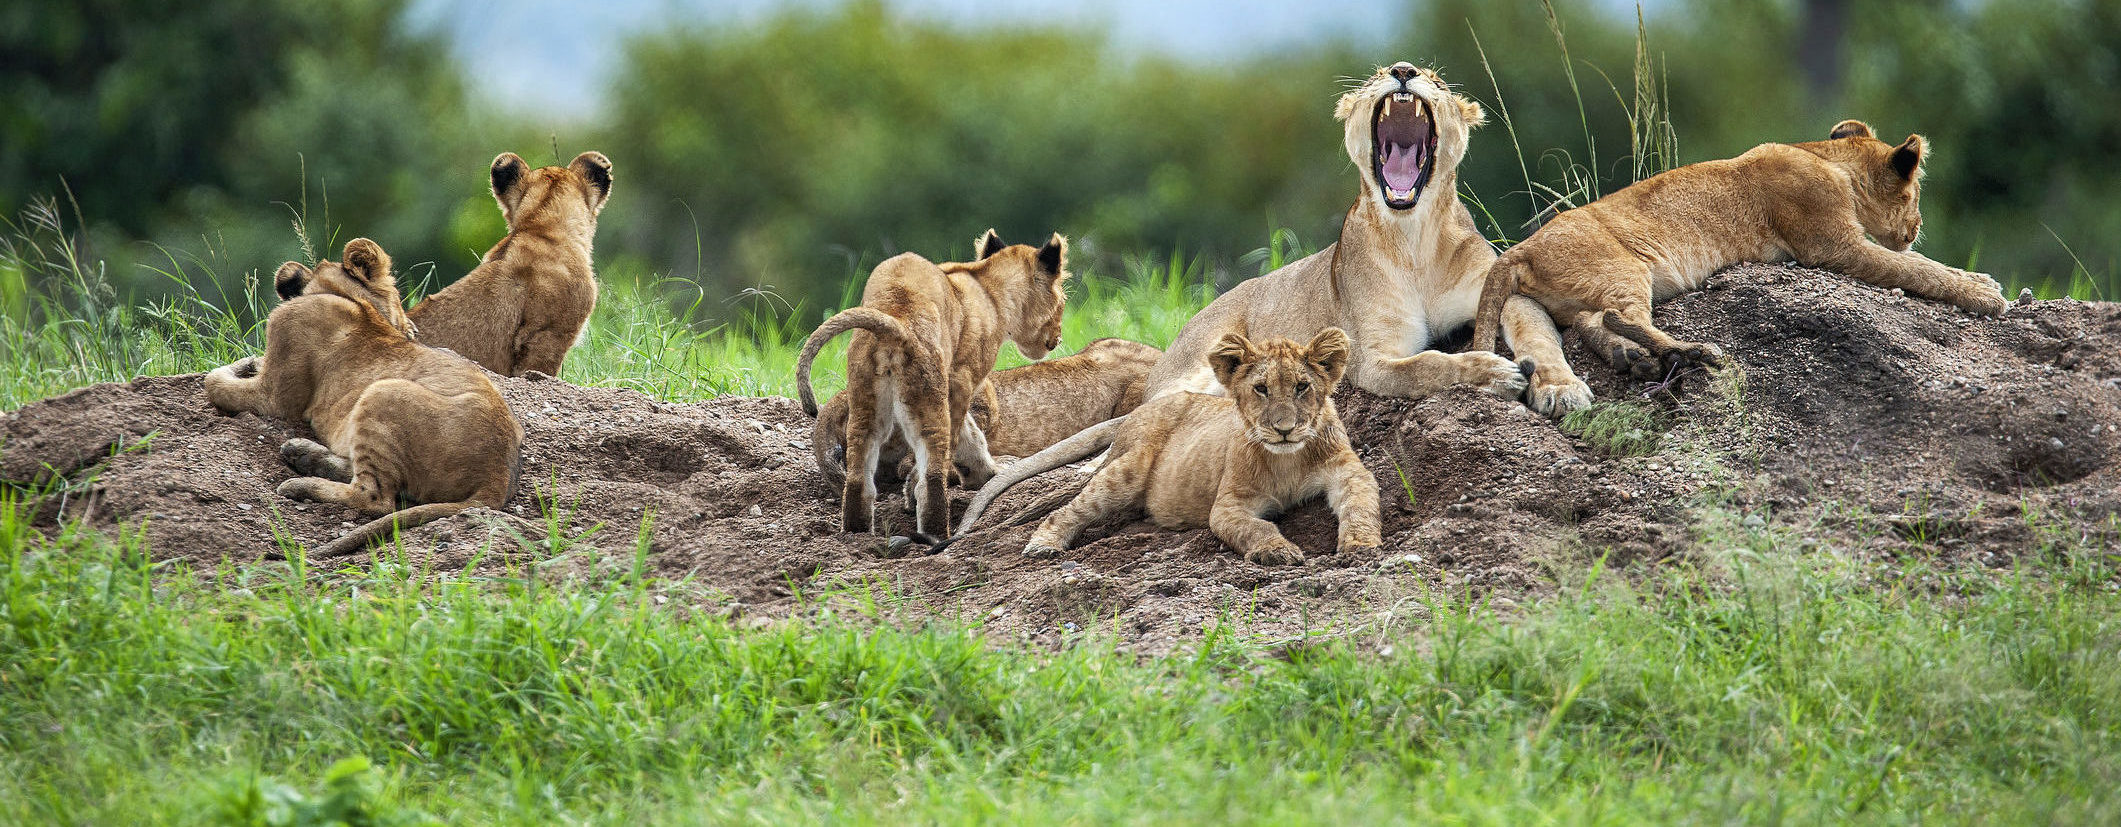 Witness extraordinary Tanzania wildlife like these Serengeti lions when you take a tailor-made holiday with Alfred&.